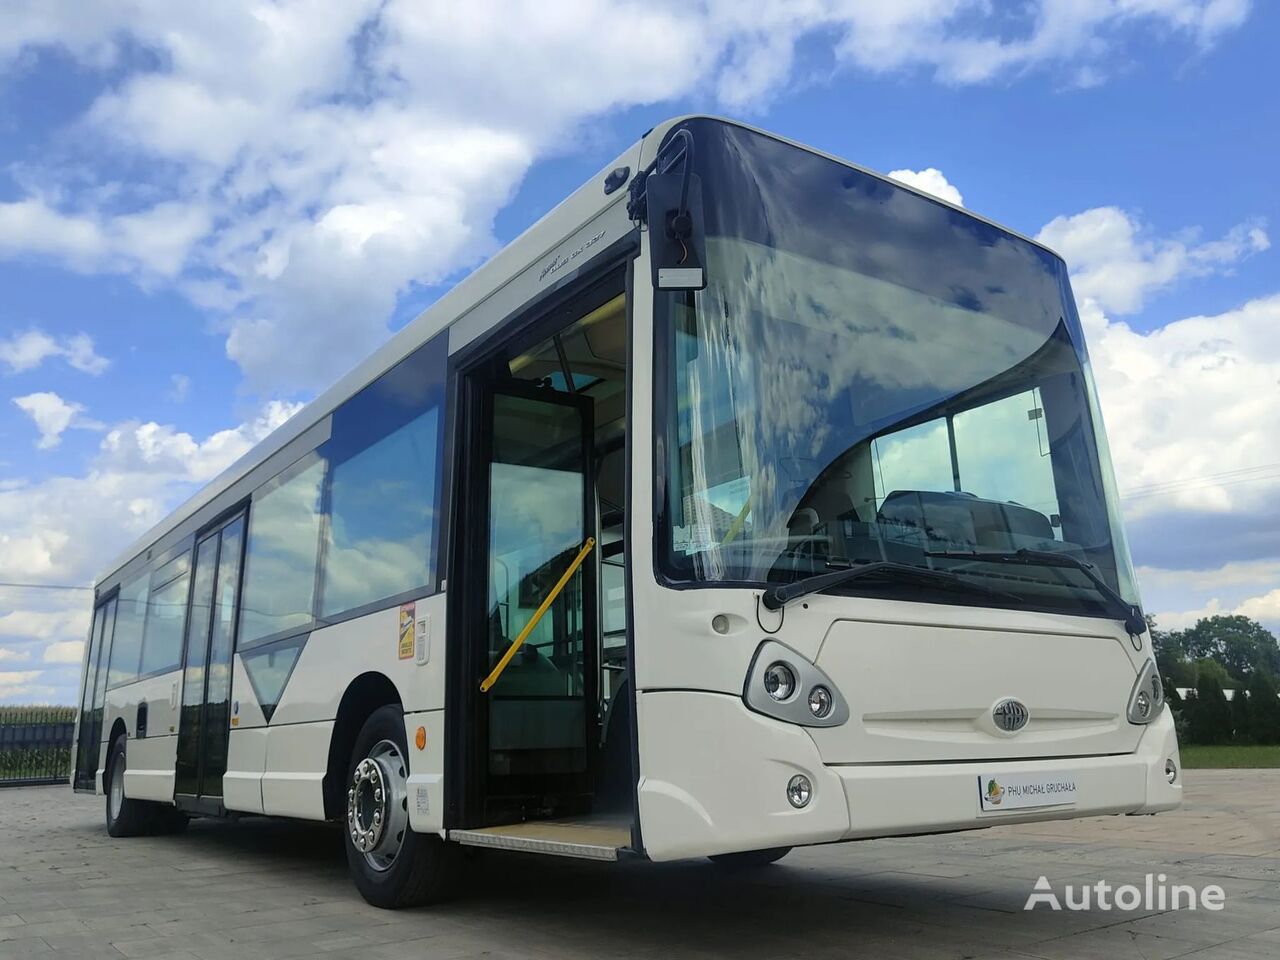 HeuliezBus GX 327 KM ONLY HALF milion - FULL service from new ! perfect con city bus